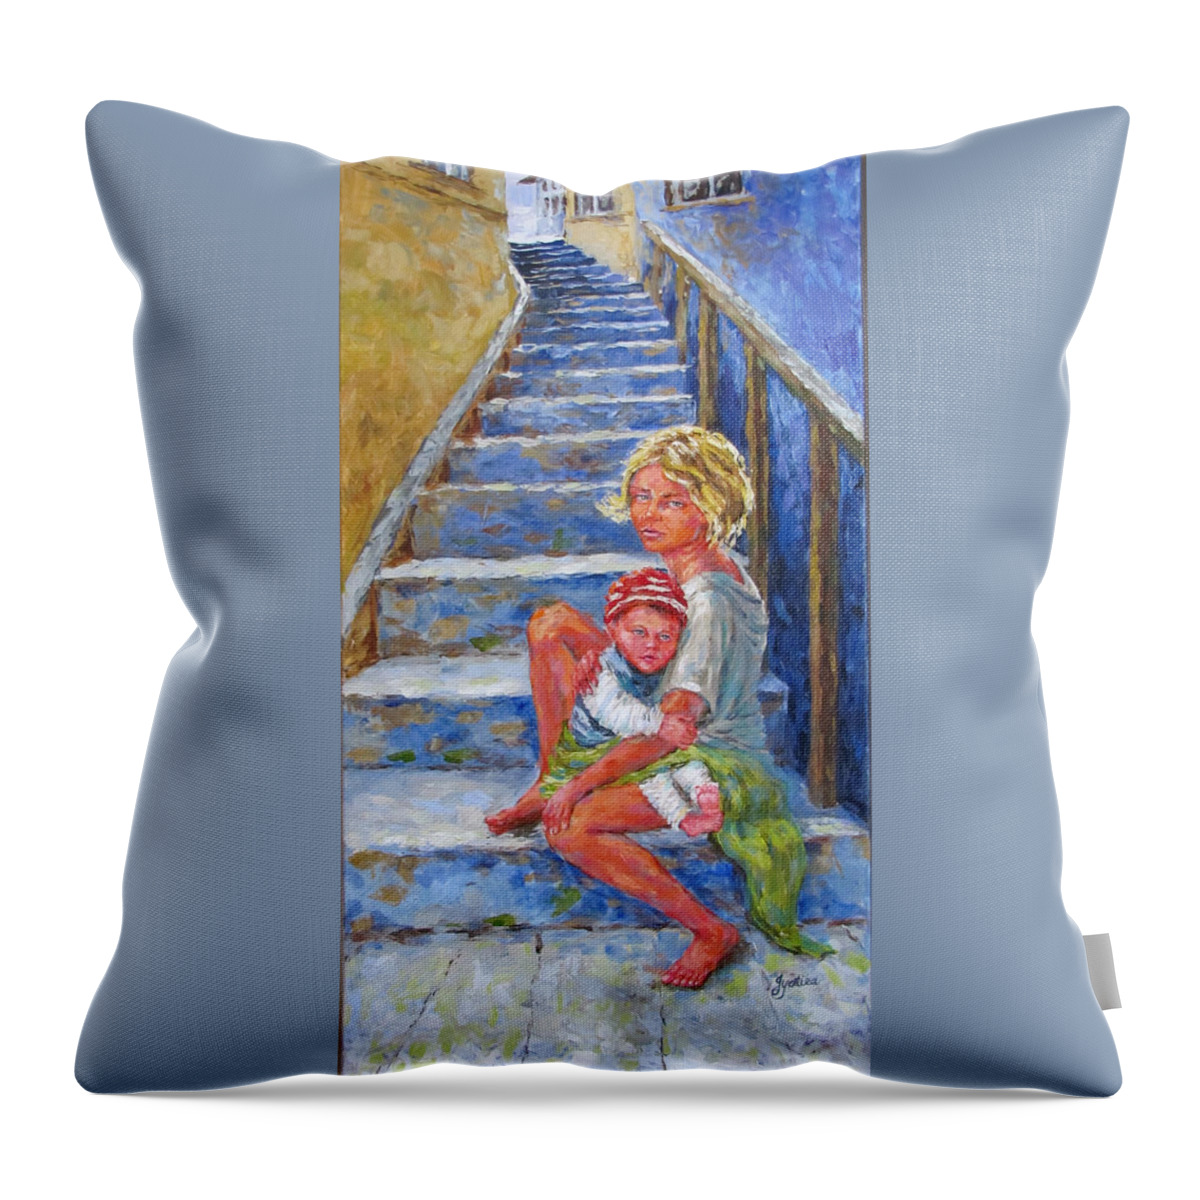 Siblings Throw Pillow featuring the painting Abandoned by Jyotika Shroff